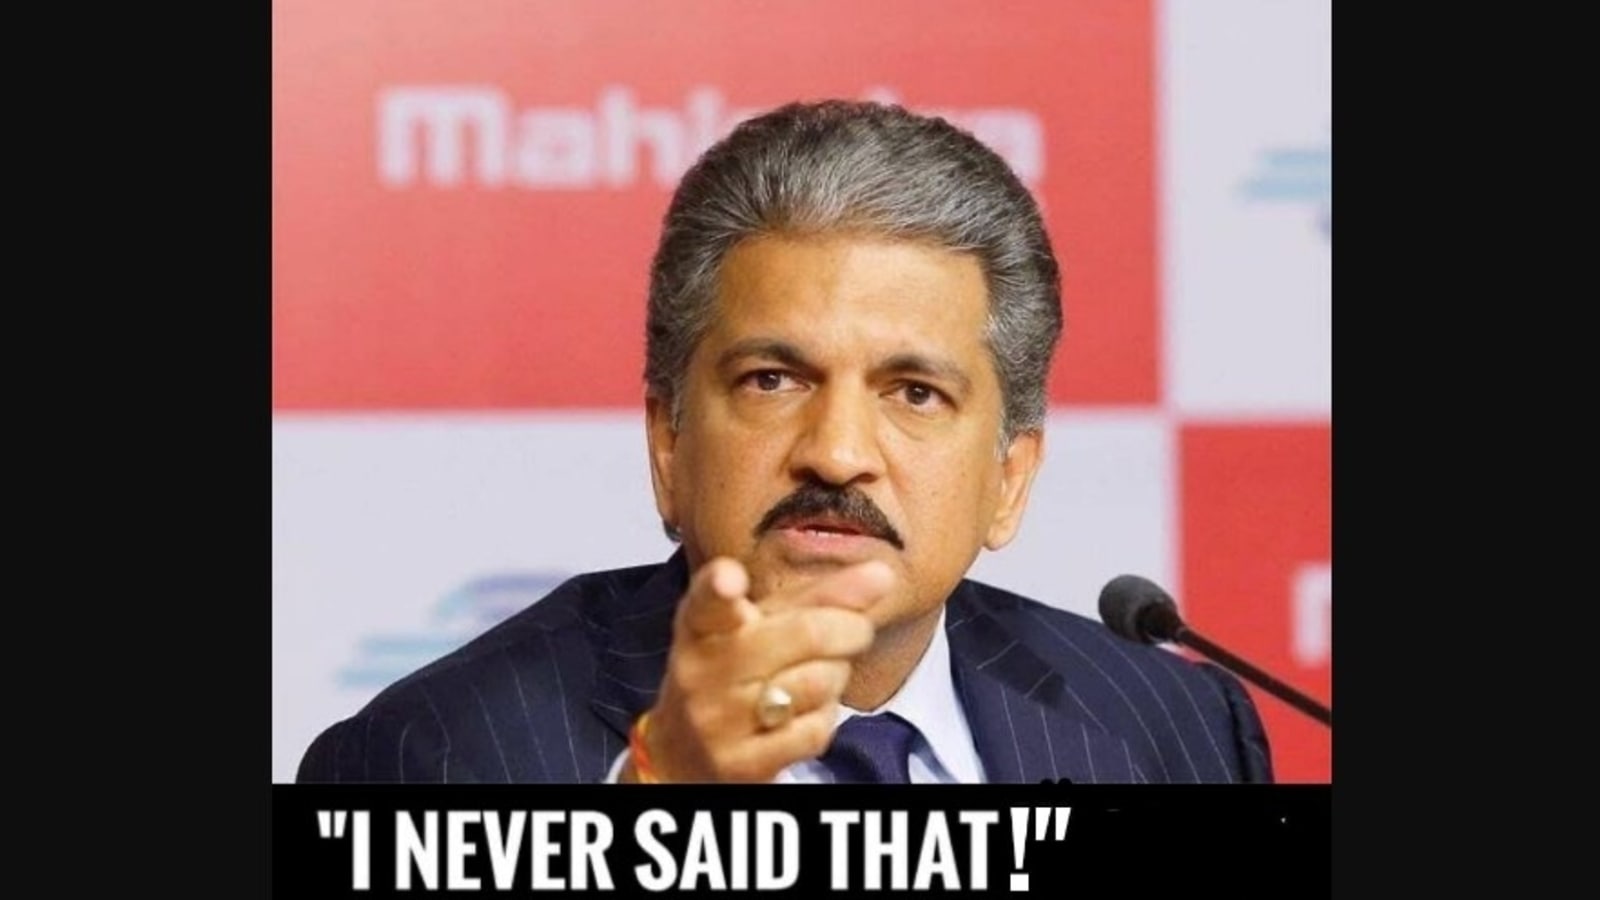 Anand Mahindra Uses Memes To Dismiss Quote Falsely Attributed To Him Trending Hindustan Times 4564